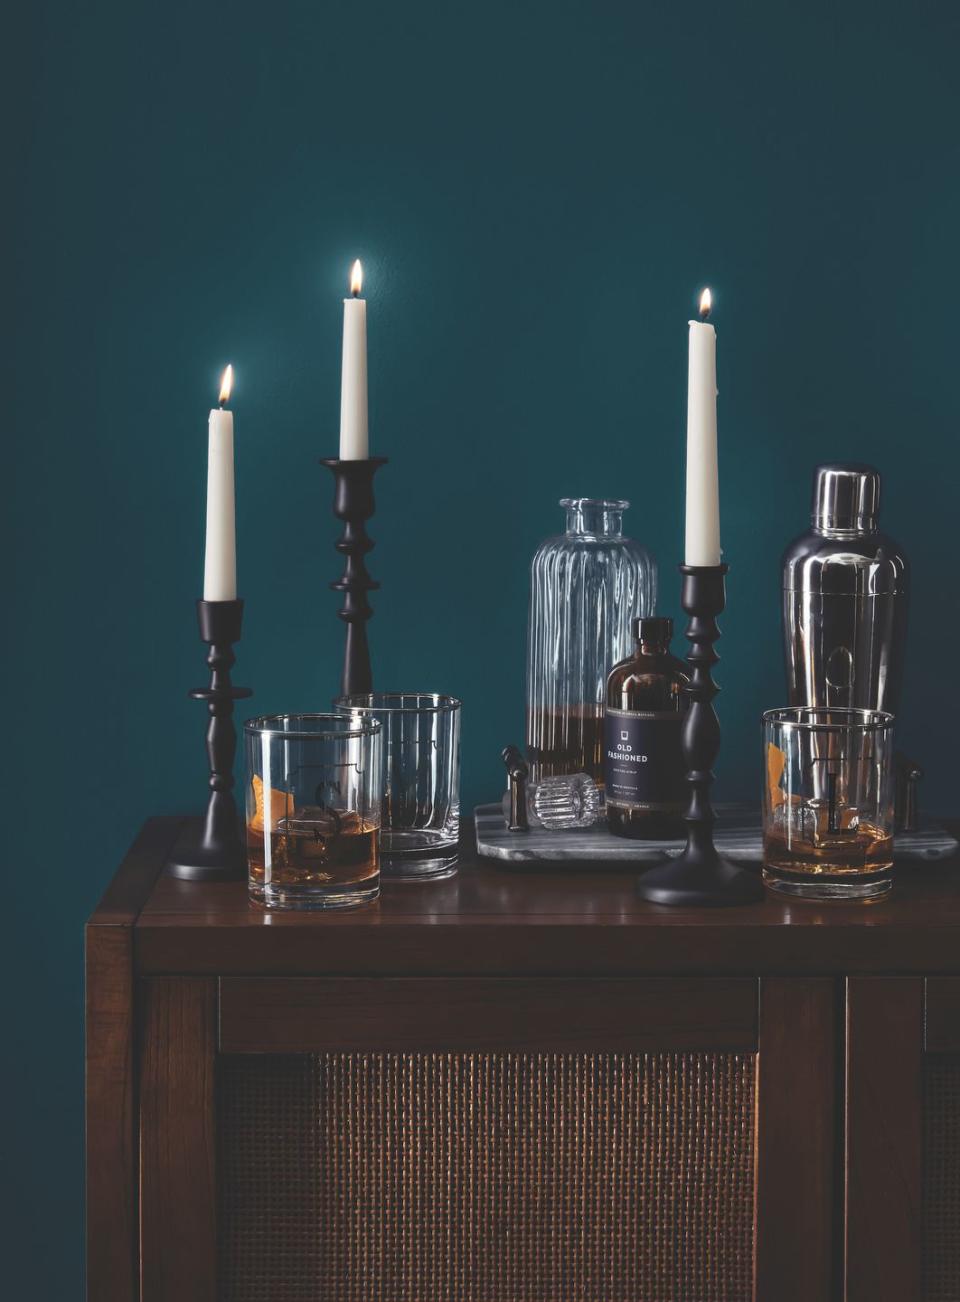 10) Candle Holders